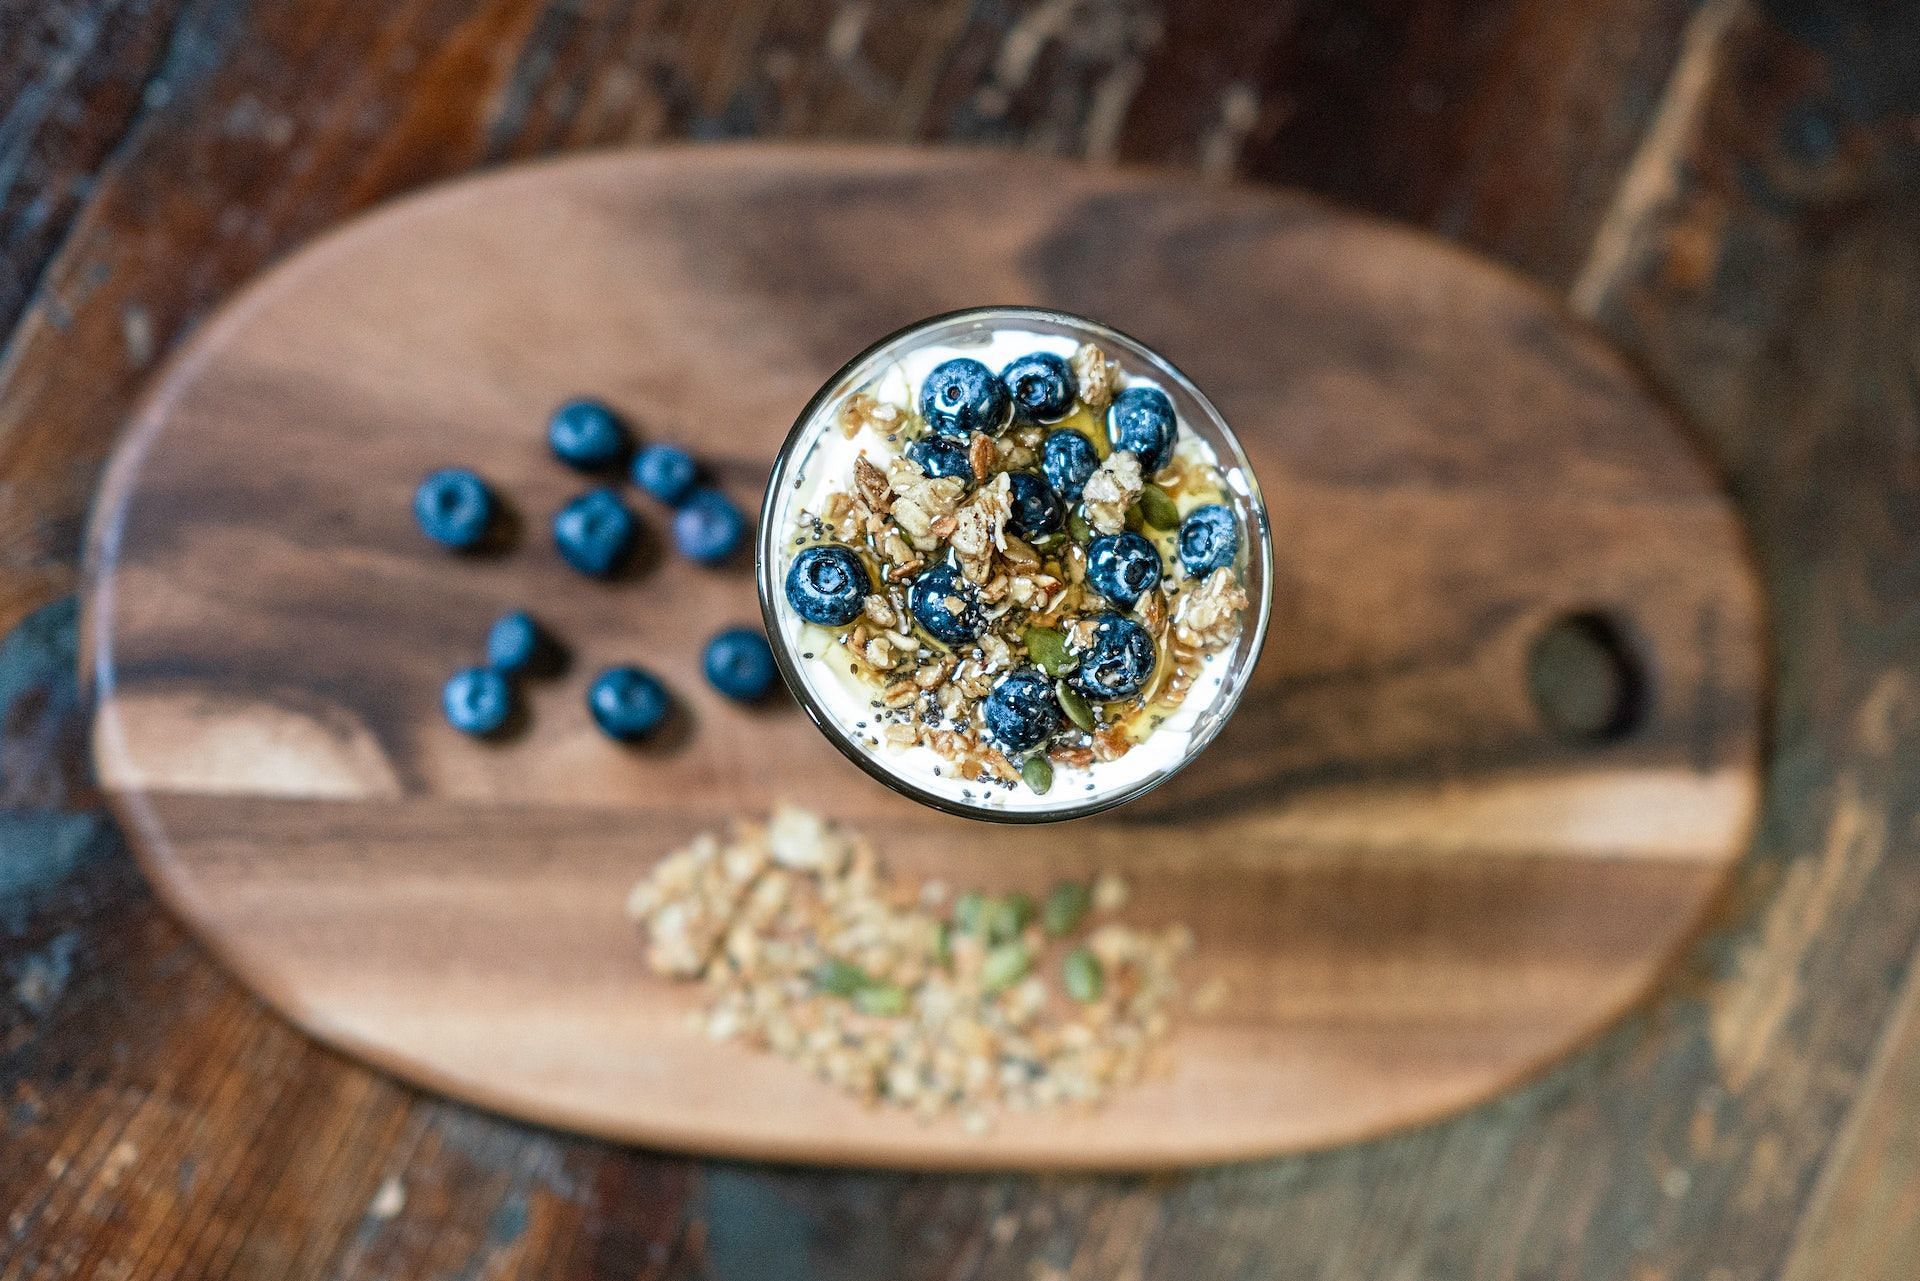 There are several foods to eat before a workout. (Photo via Pexels/Daniel Torobekov)